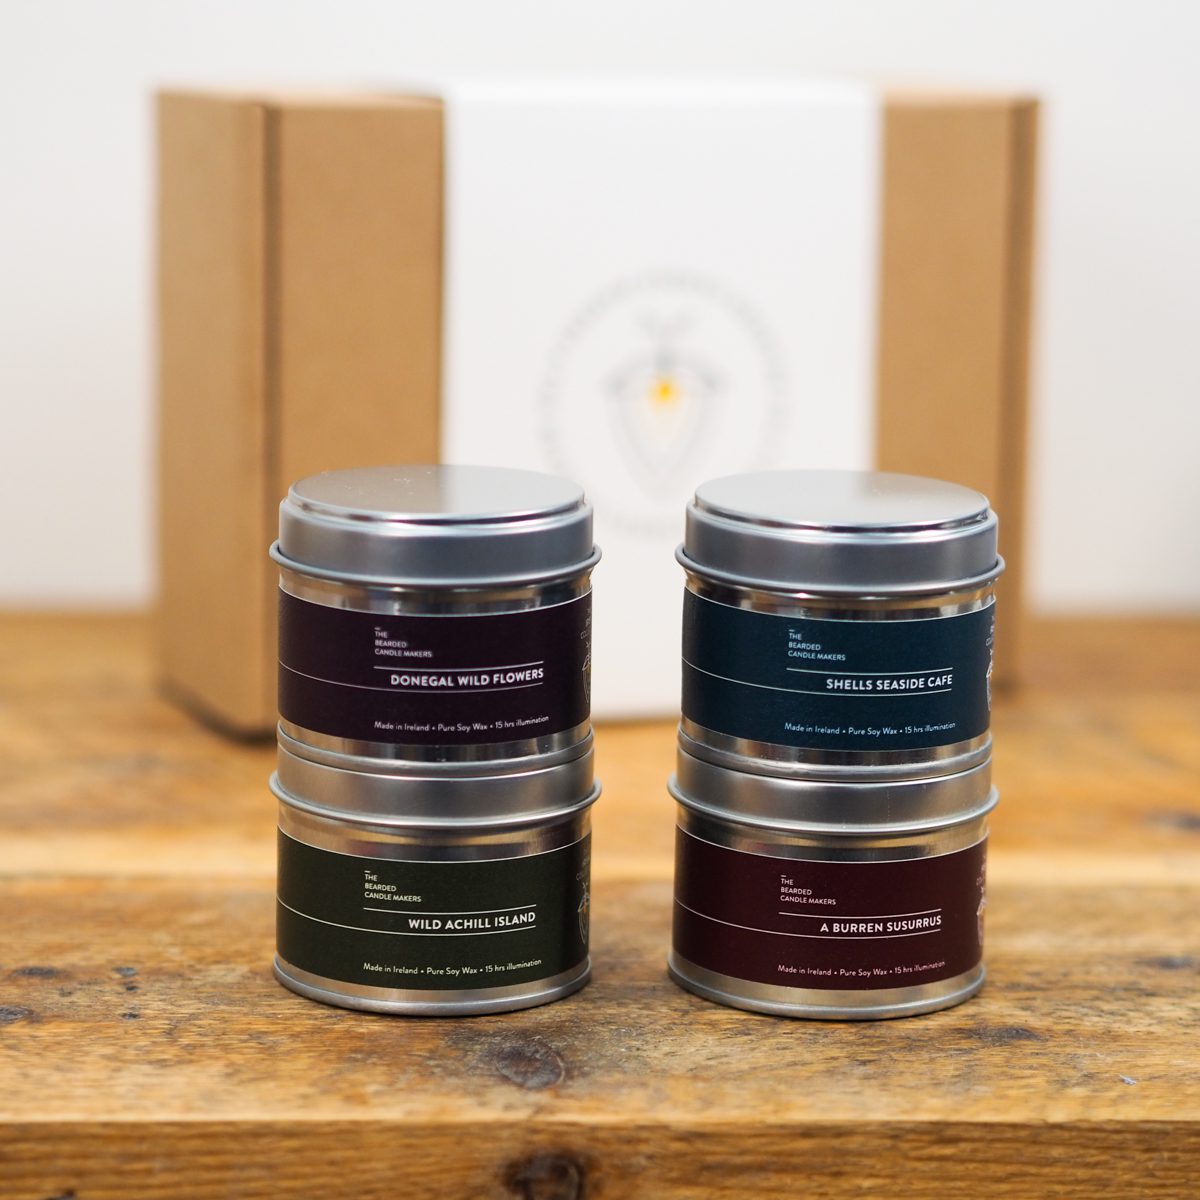 Wild Atlantic Way Gift Box Travel Size - The Bearded Candle Makers